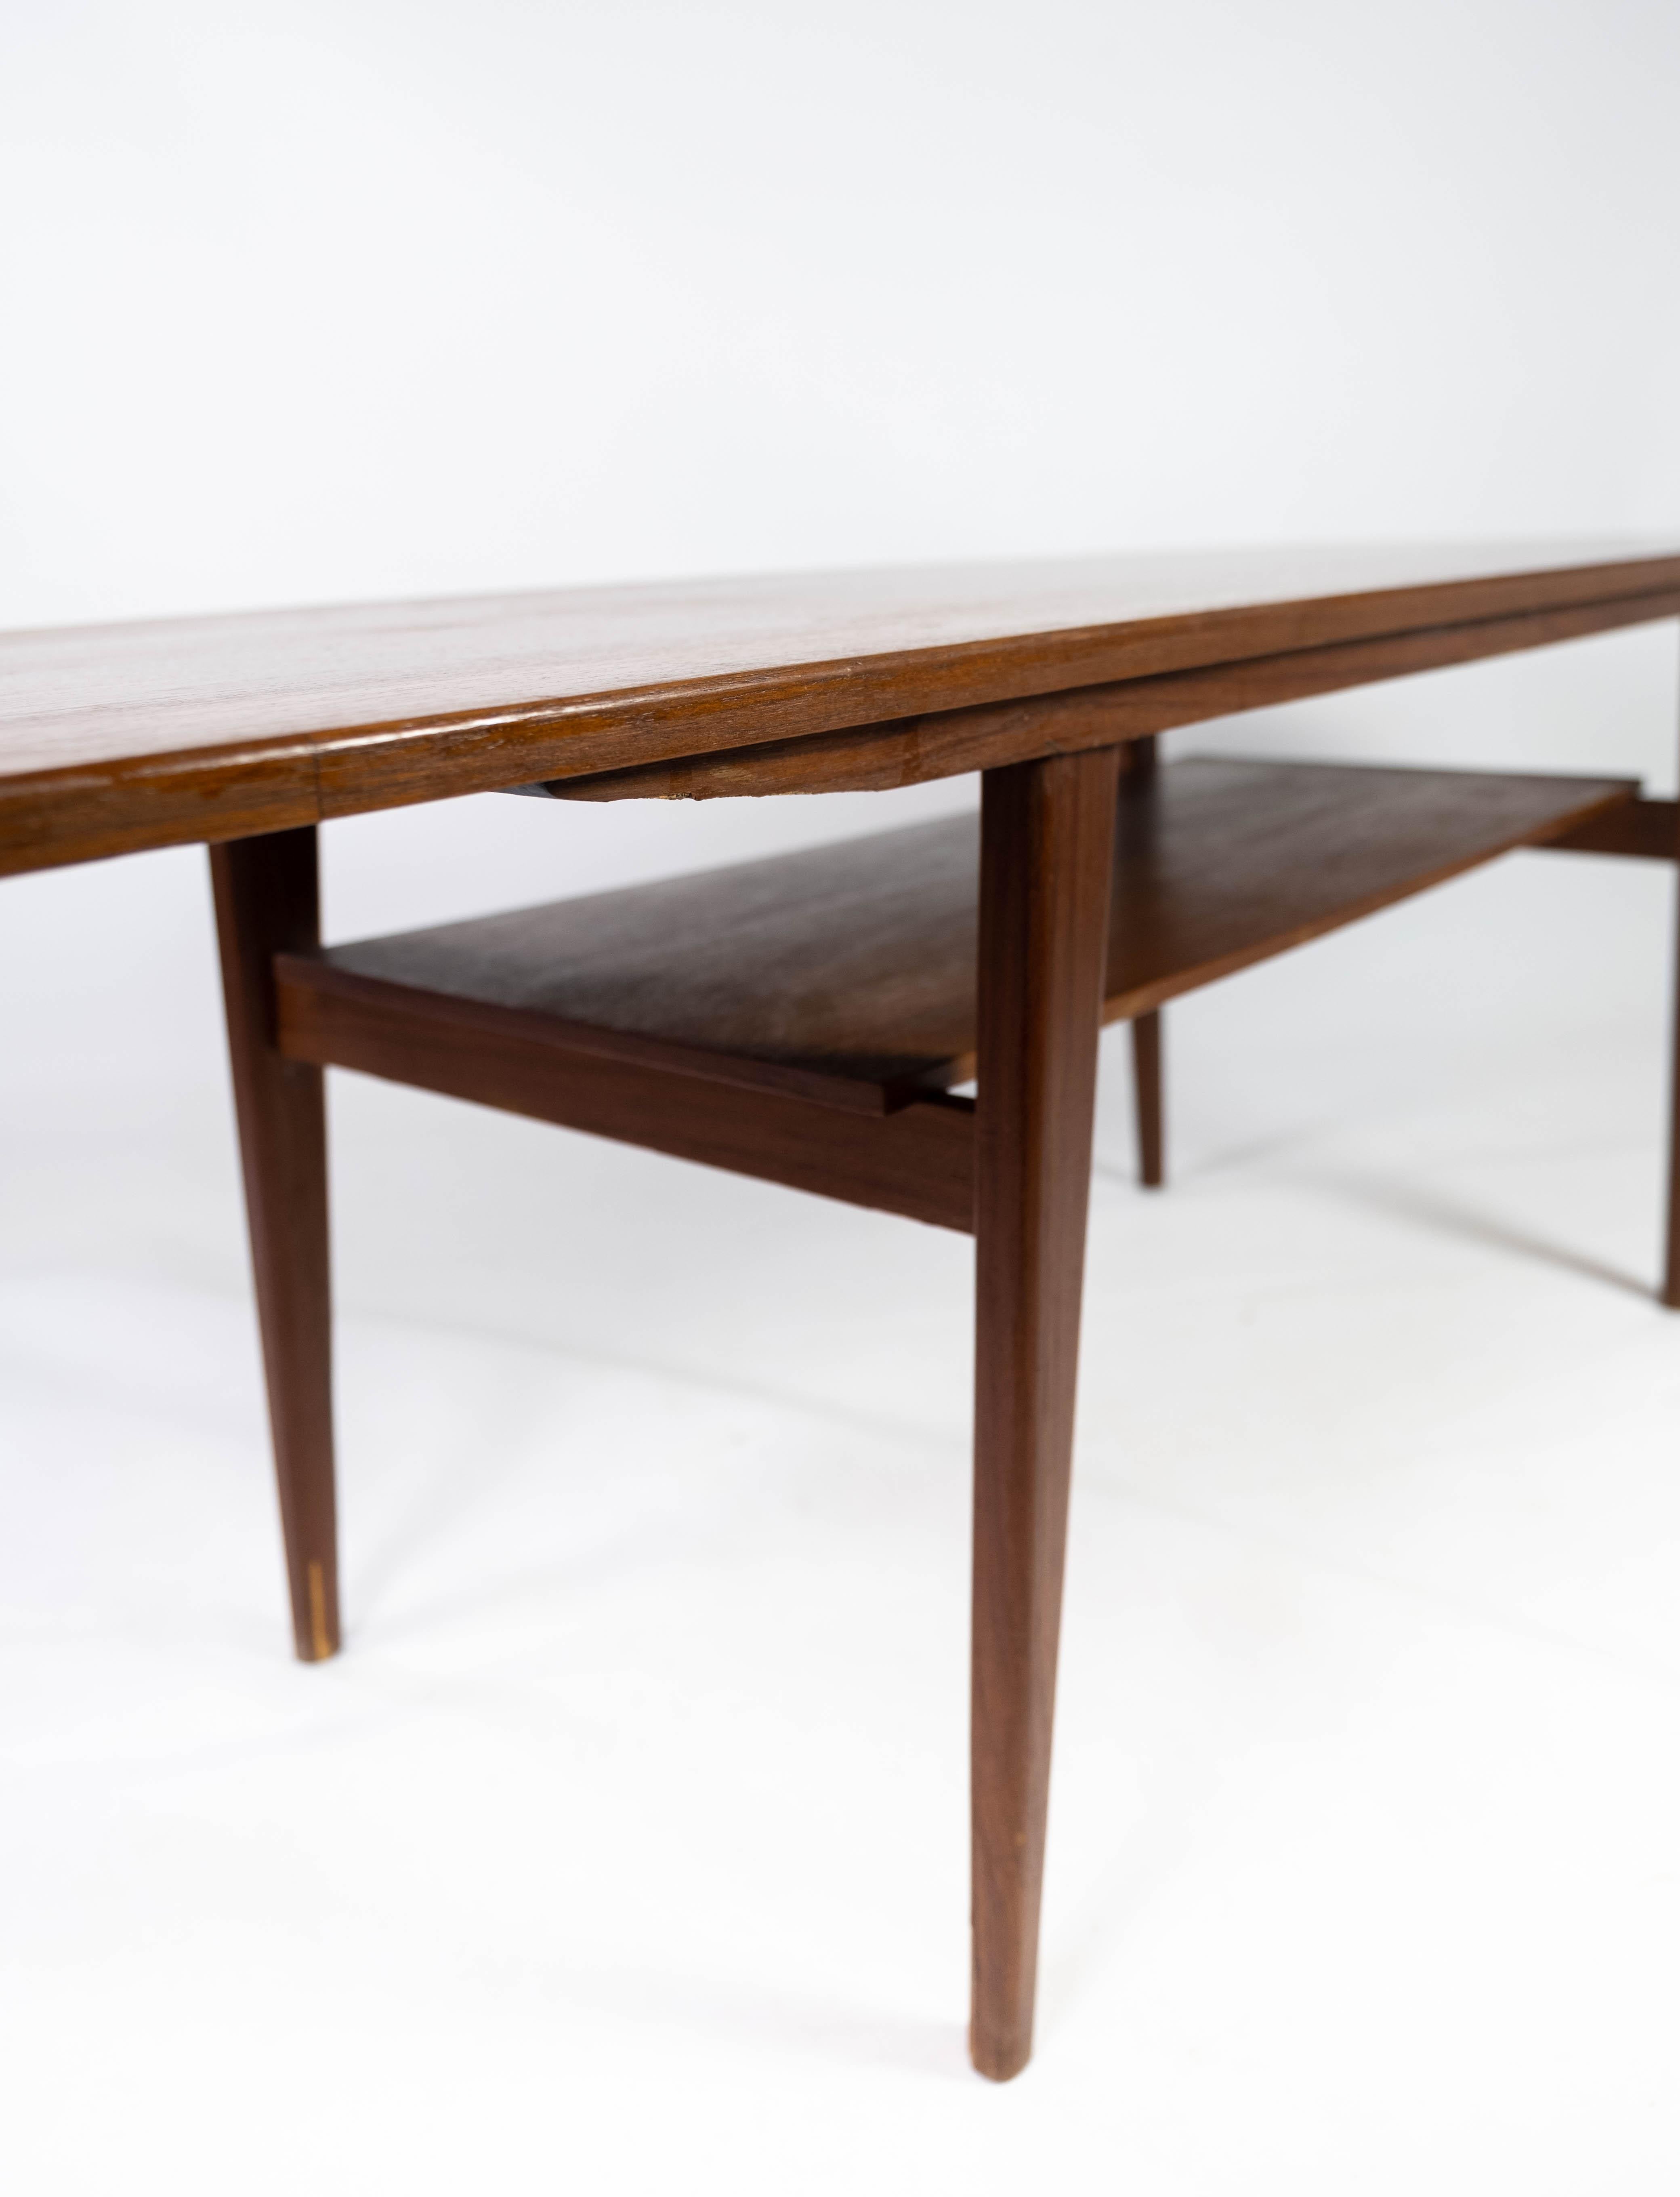 Coffee Table Made In Teak With Shelf, Danish Design From 1960s For Sale 3